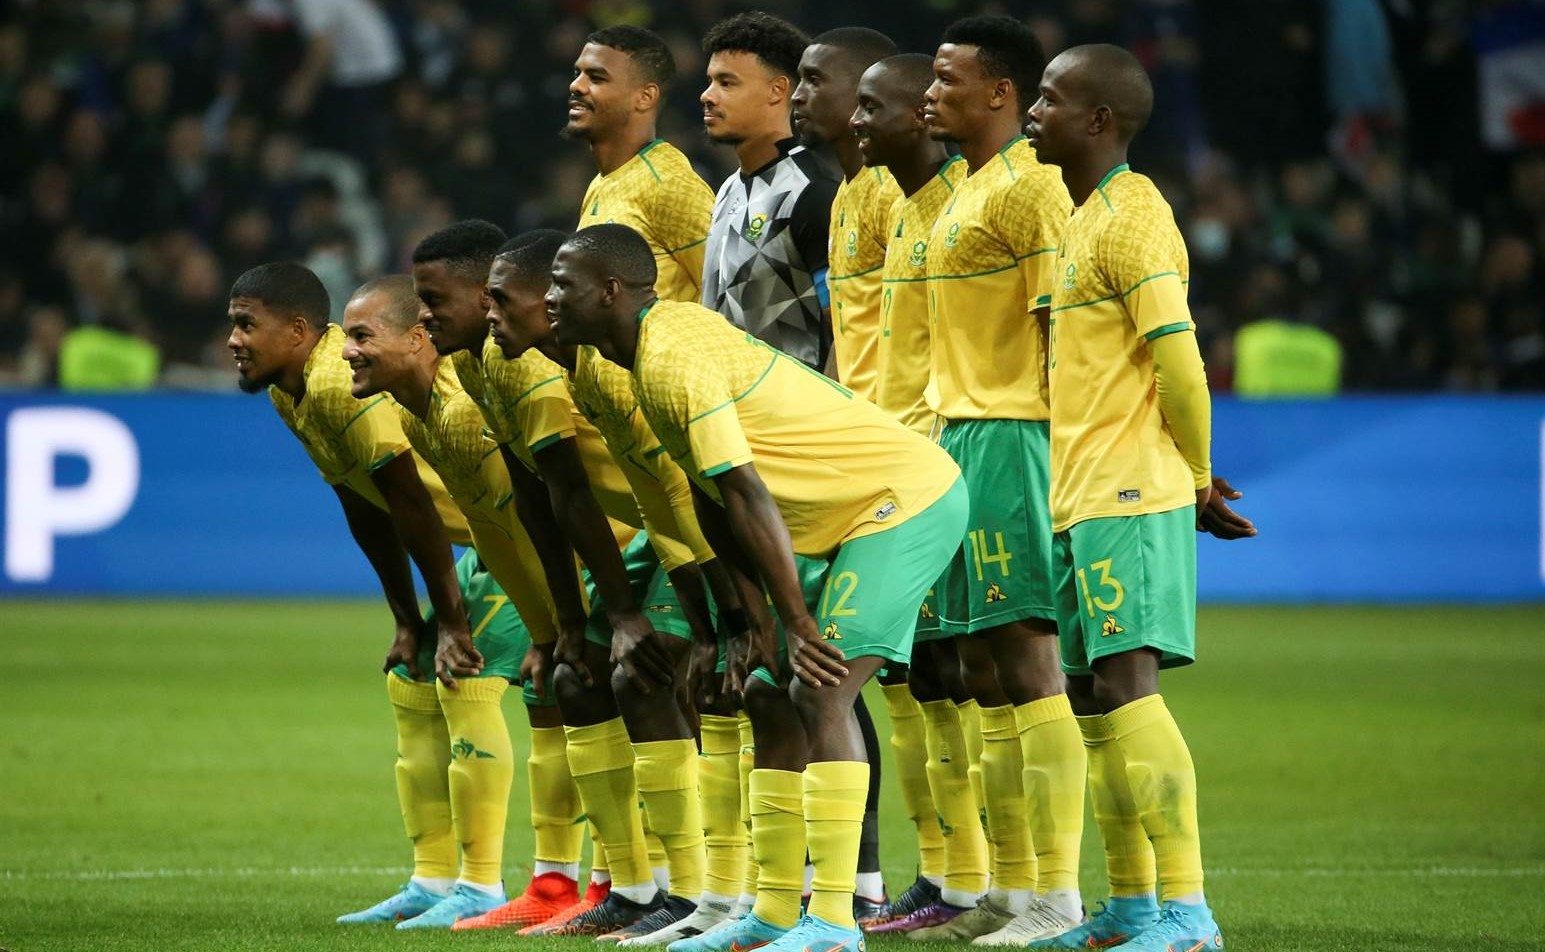 Lessons Bafana Bafana Can Take At The 2022 World Cup | The Pink Brain